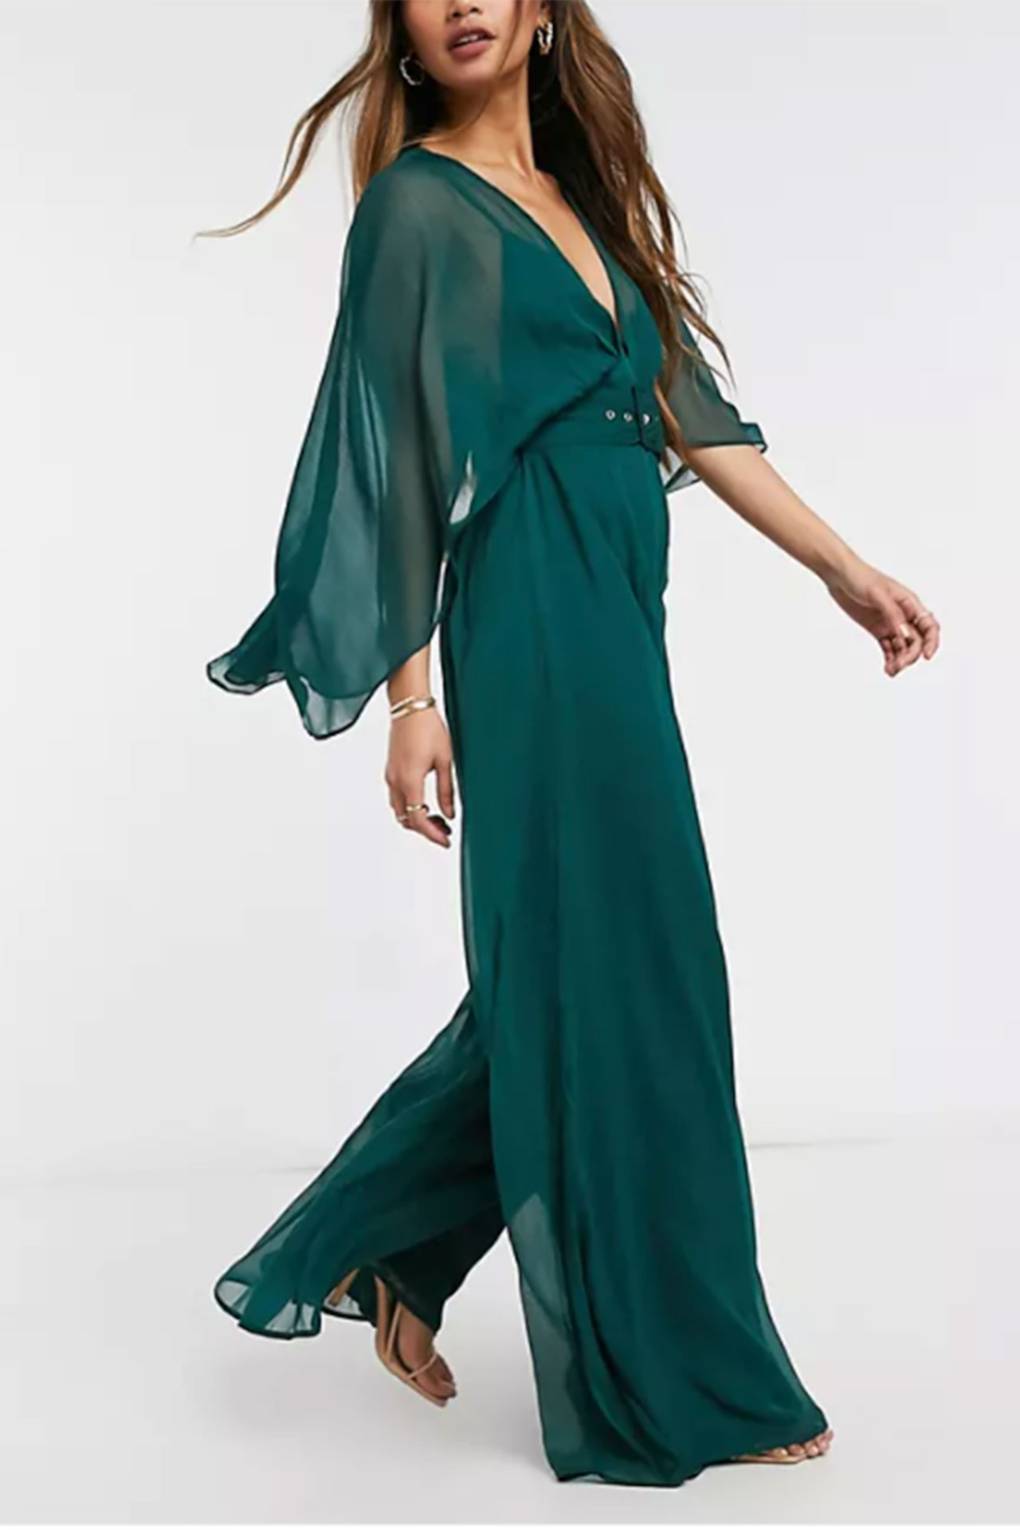 The Best Wedding Guest Jumpsuits For Spring Summer 2021 | Glamour UK